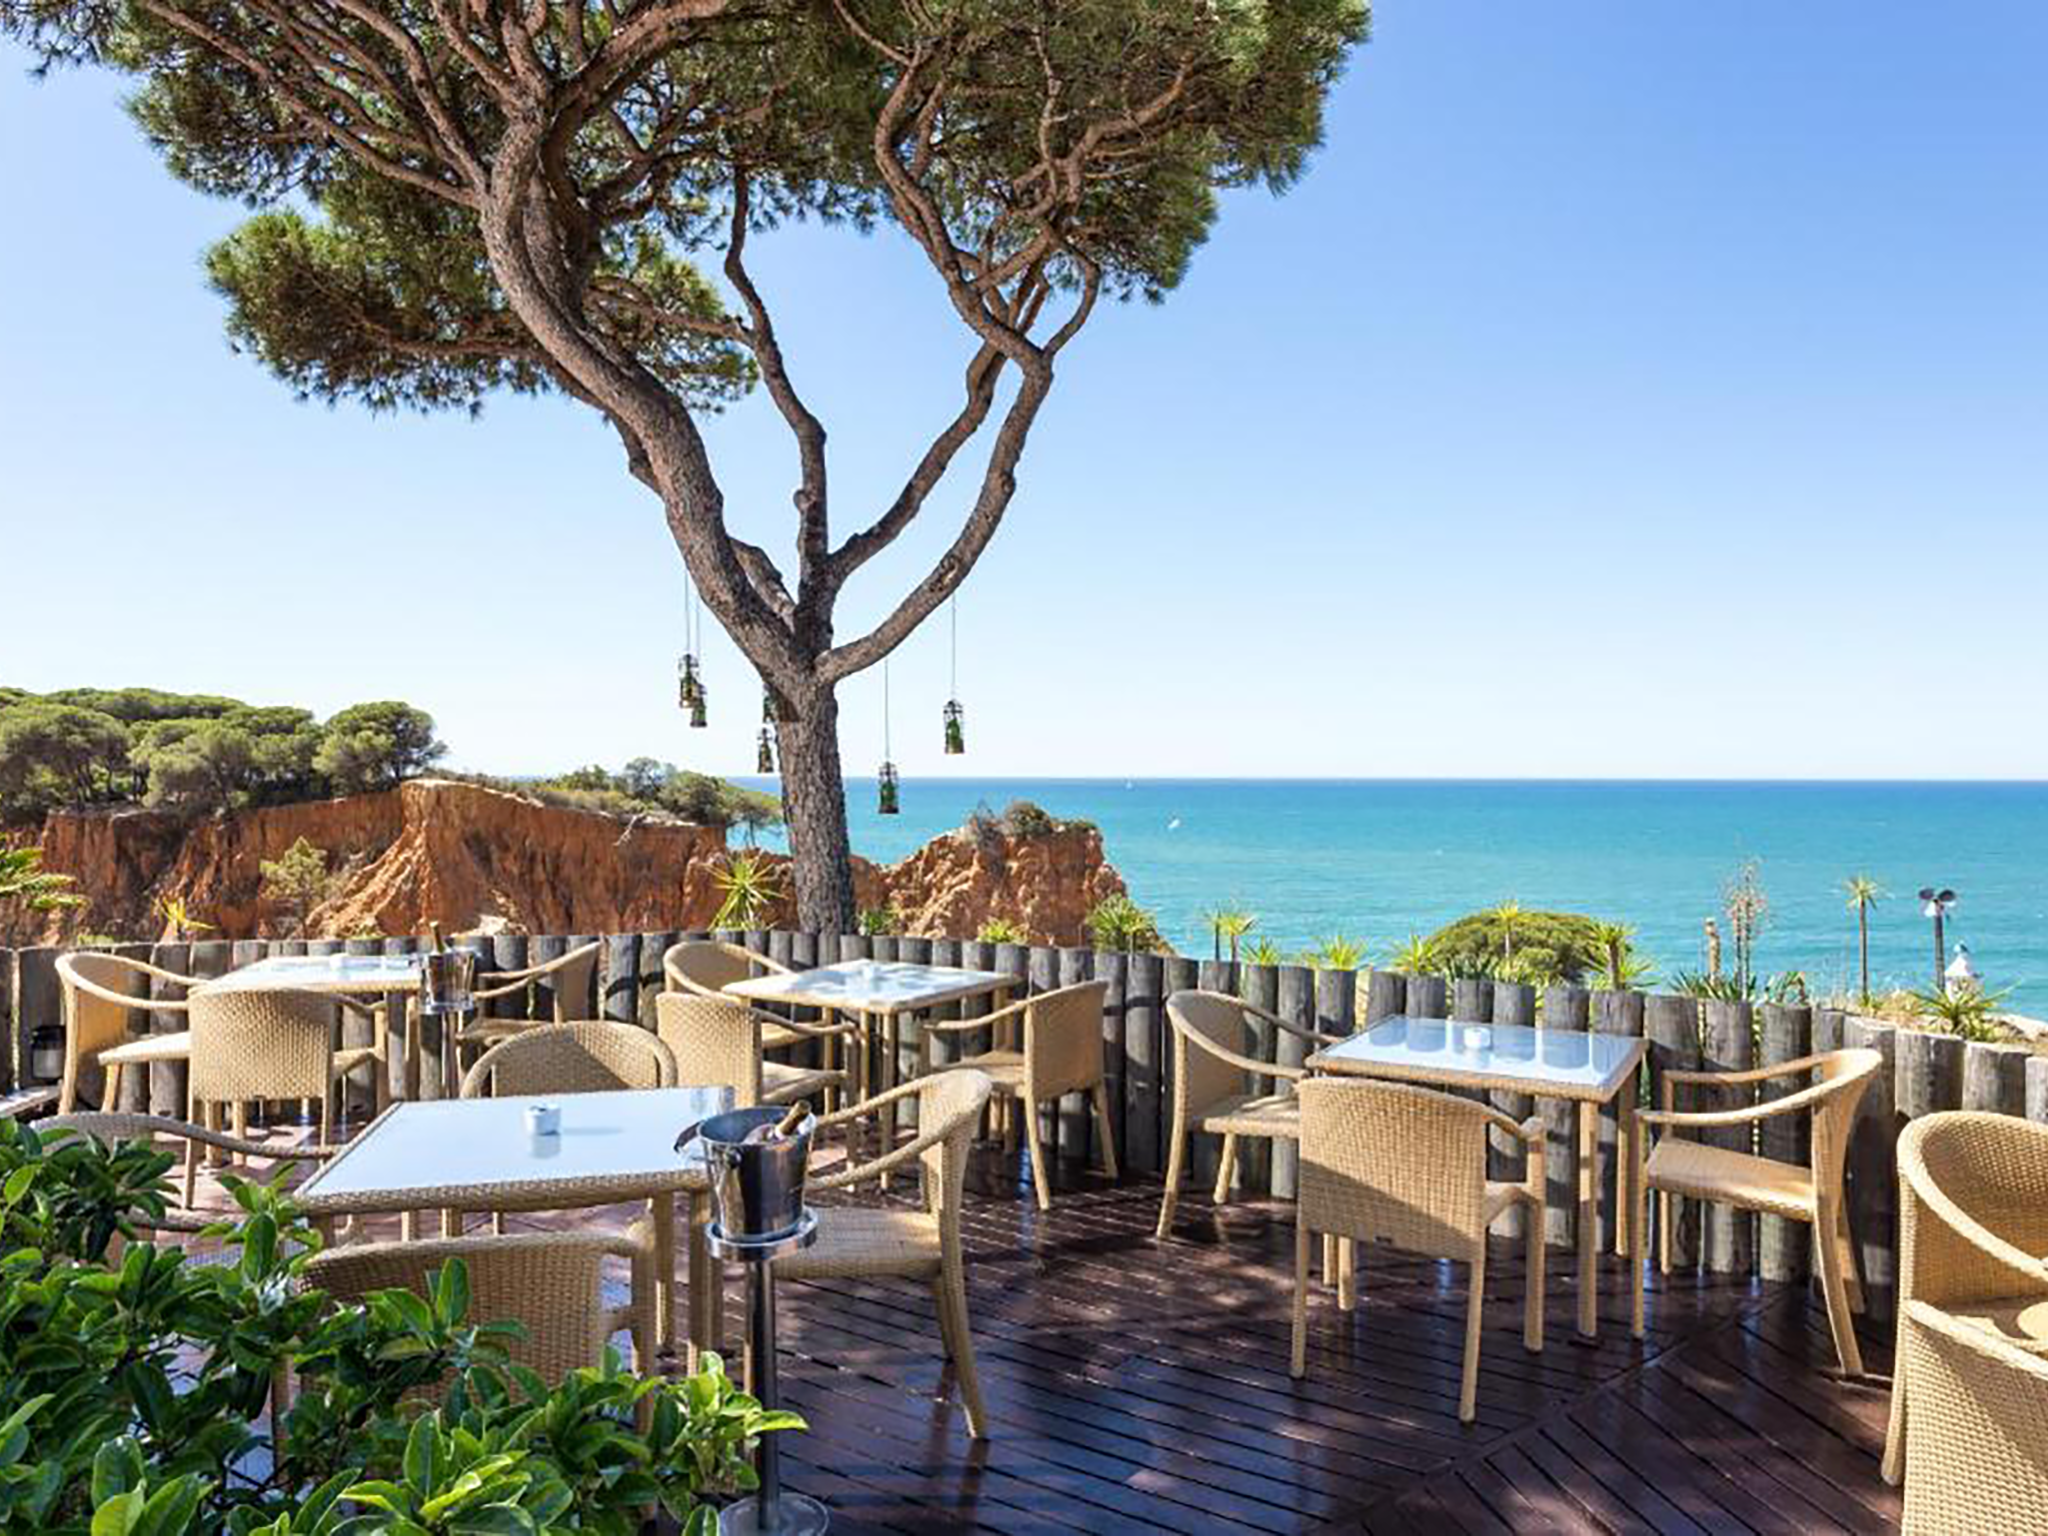 This gorgeous seaside hotel has a fish restaurant, beach café, champagne bar and more